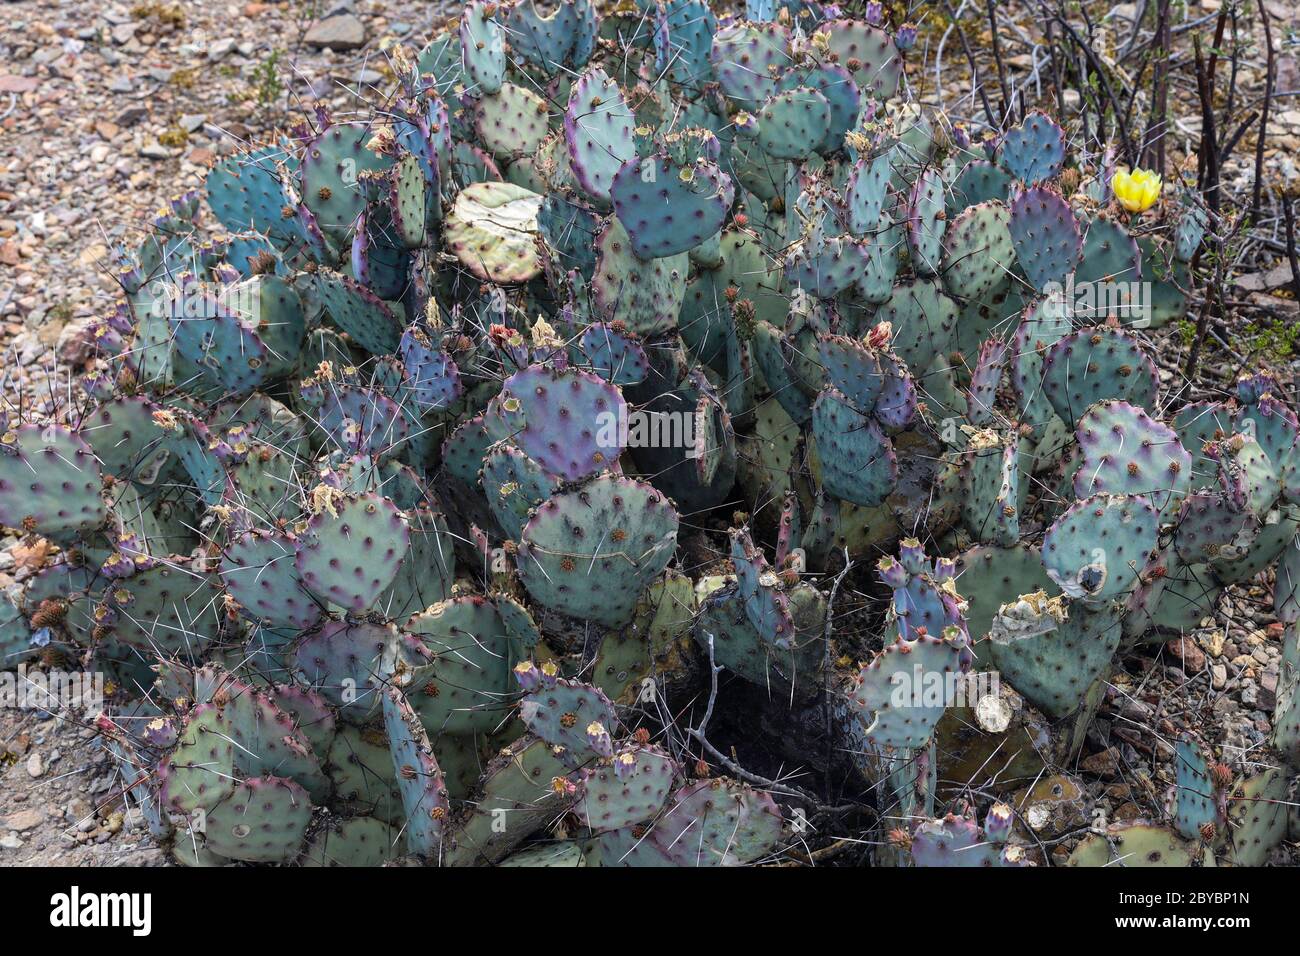 Flowering Prickly Pear Cactus found on the Chihuahuan Desert Nature Trail in Big Bend National Park Stock Photo